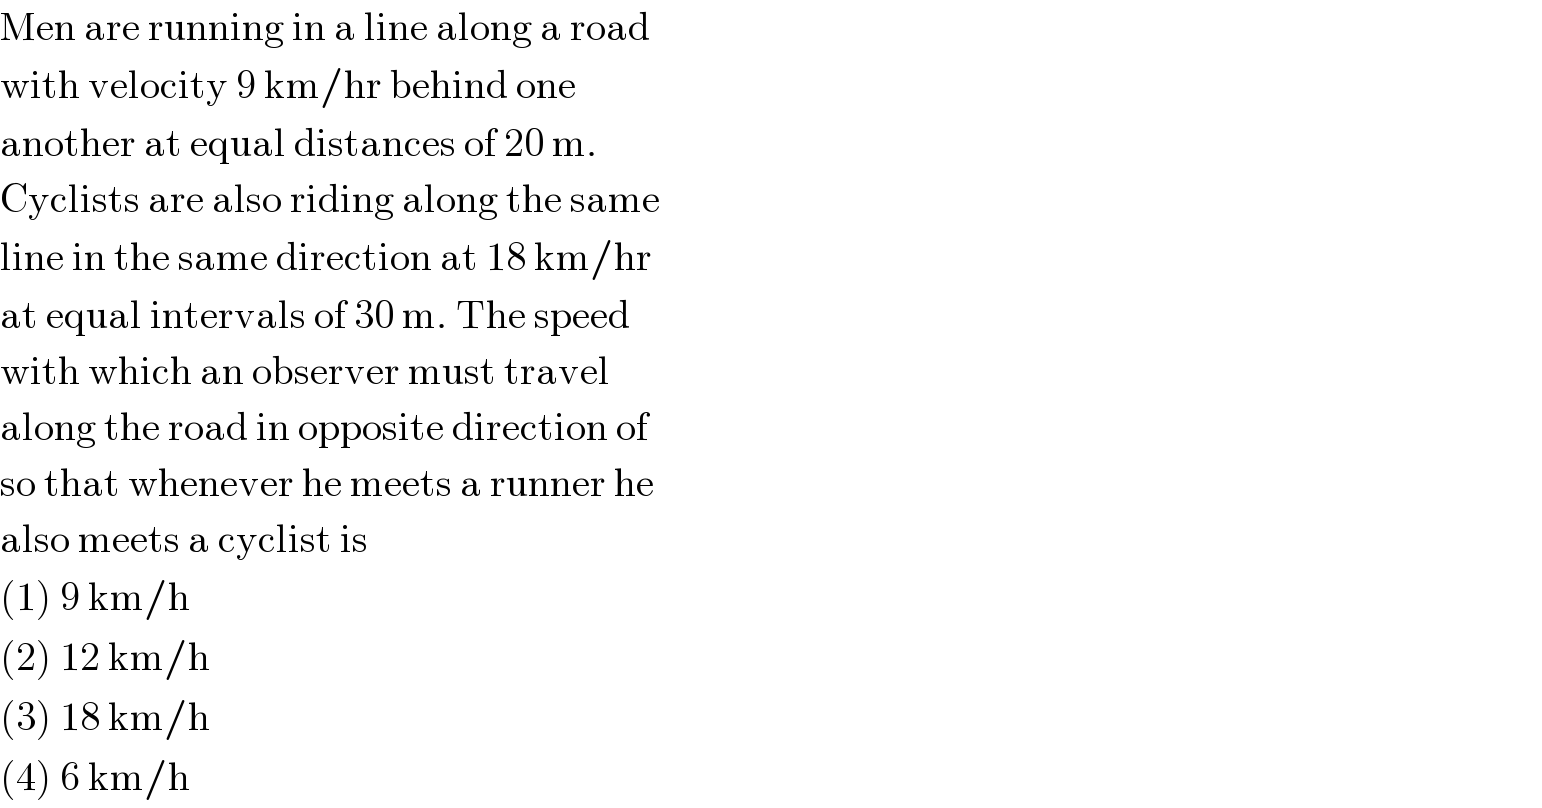 Men are running in a line along a road  with velocity 9 km/hr behind one  another at equal distances of 20 m.  Cyclists are also riding along the same  line in the same direction at 18 km/hr  at equal intervals of 30 m. The speed  with which an observer must travel  along the road in opposite direction of  so that whenever he meets a runner he  also meets a cyclist is  (1) 9 km/h  (2) 12 km/h  (3) 18 km/h  (4) 6 km/h  